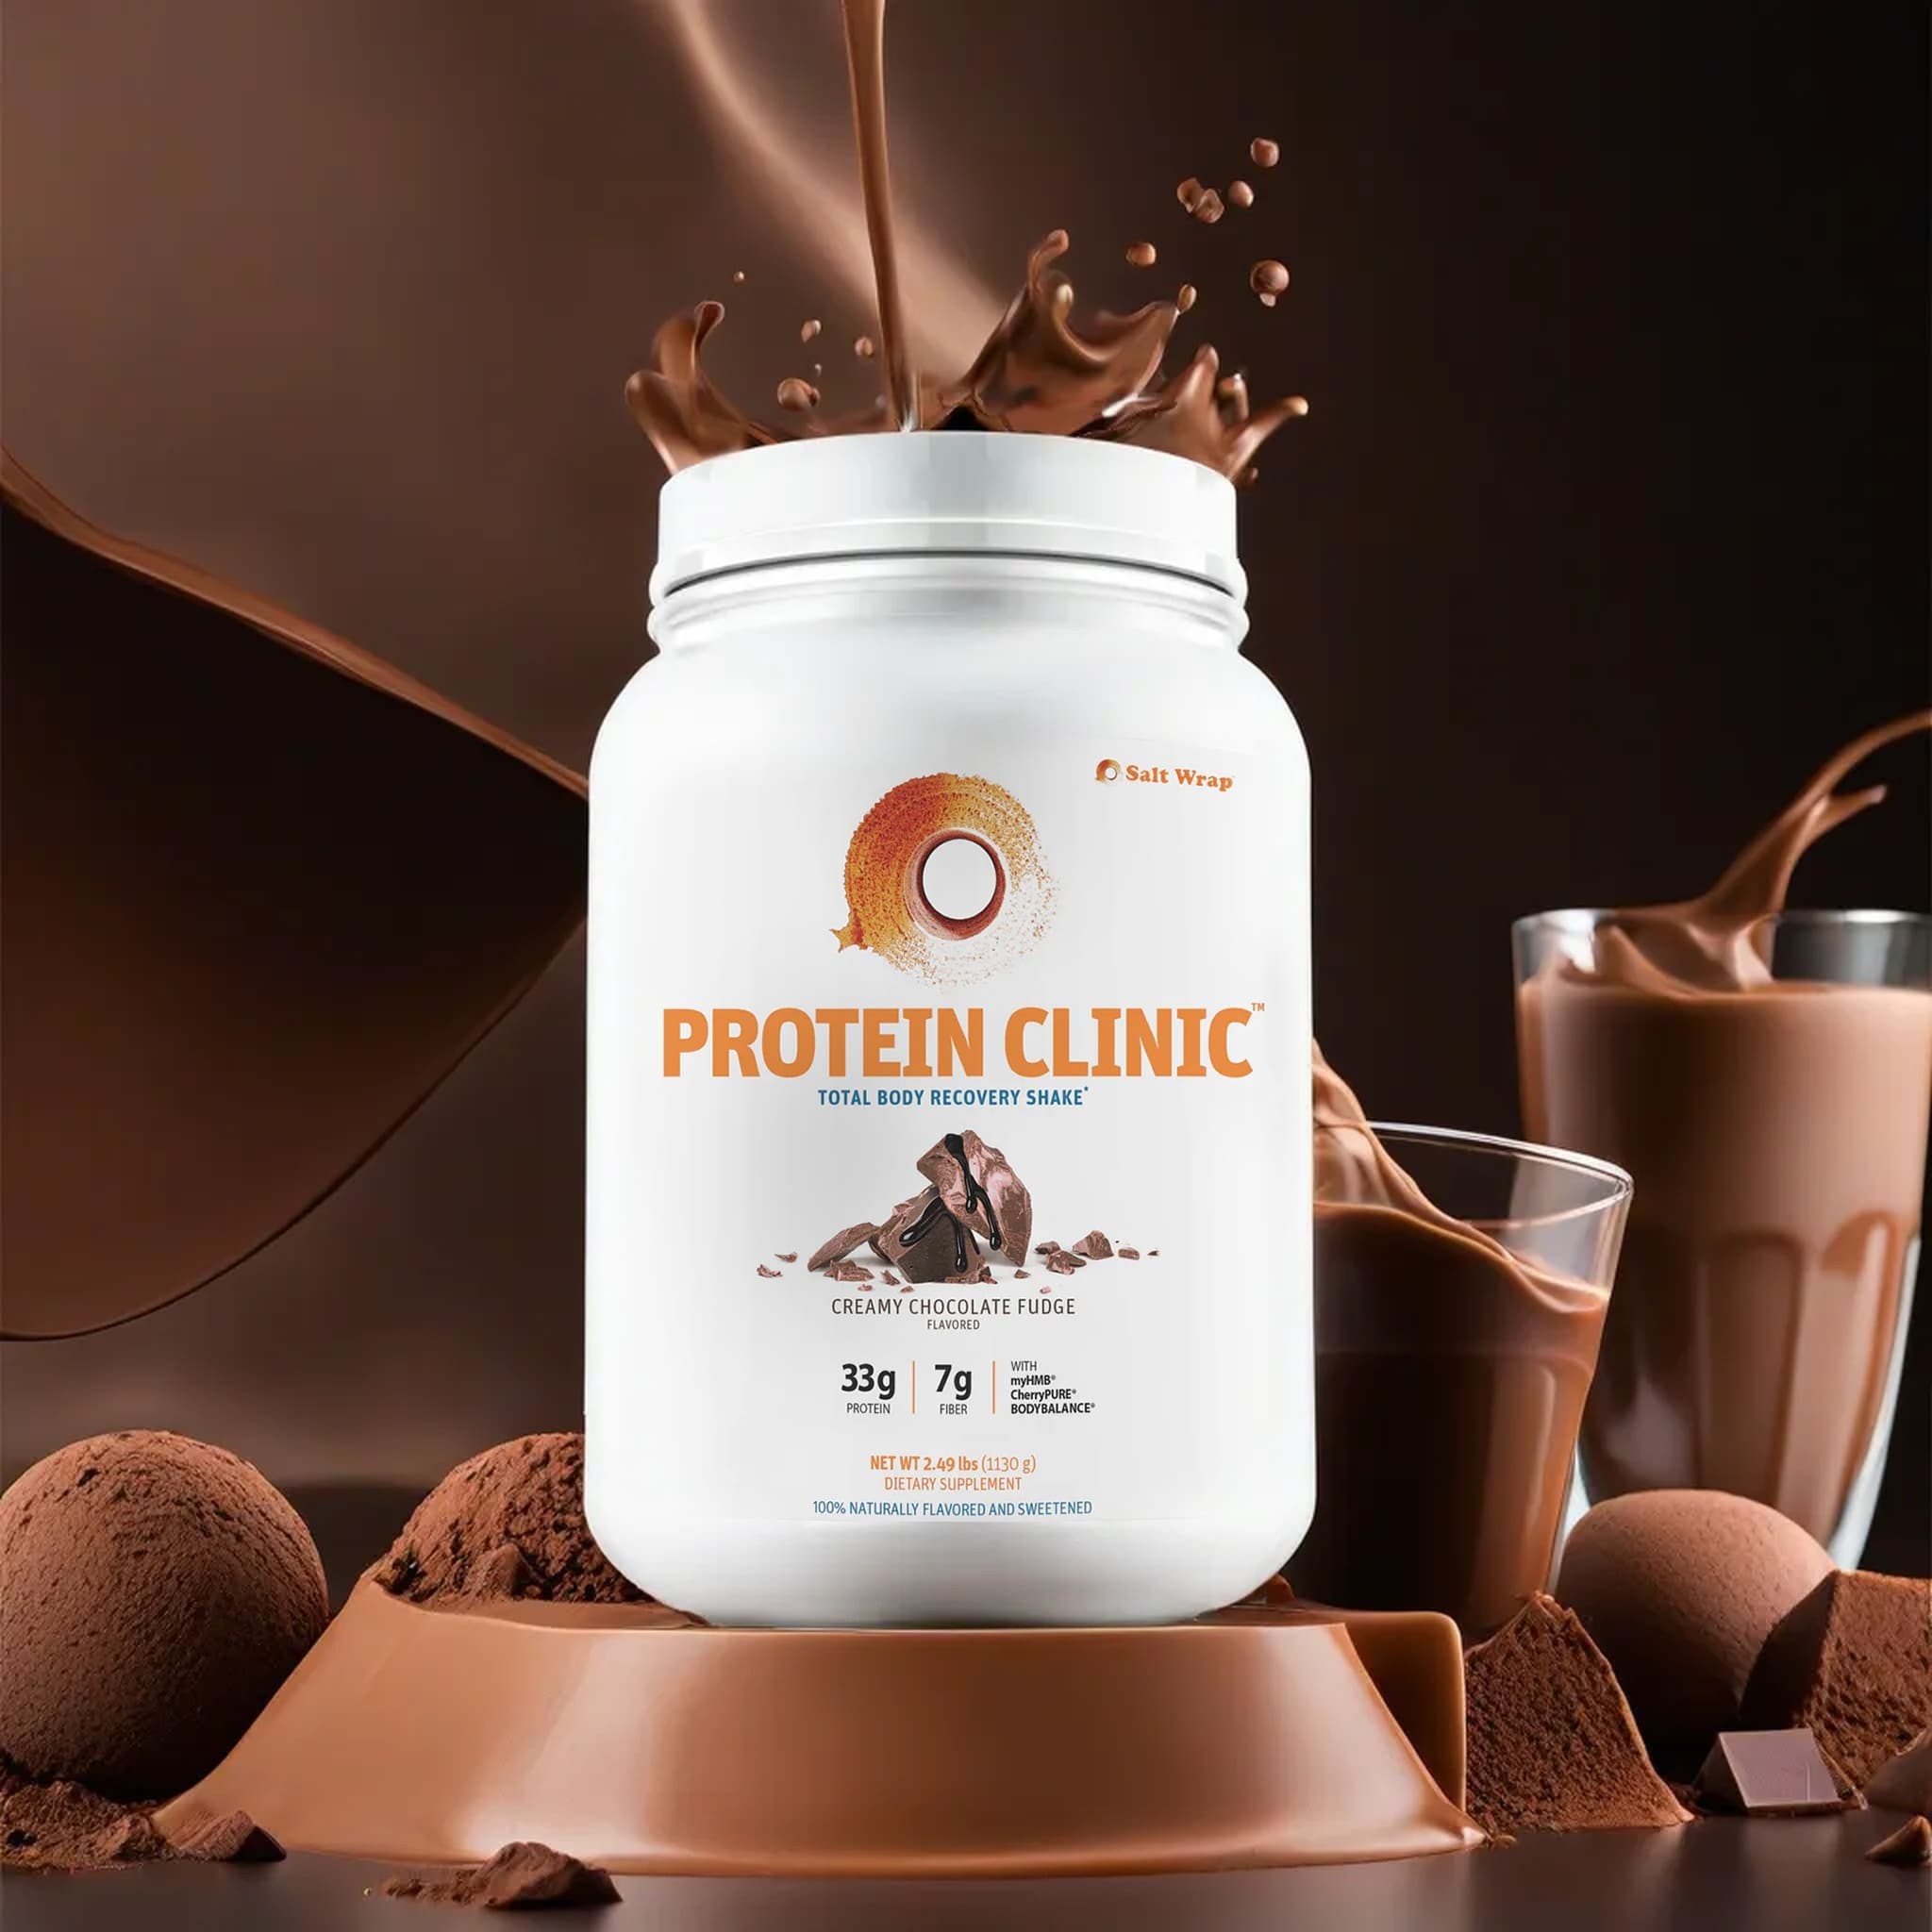 You’re going to love the new Creamy Chocolate Fudge Protein Clinic™.